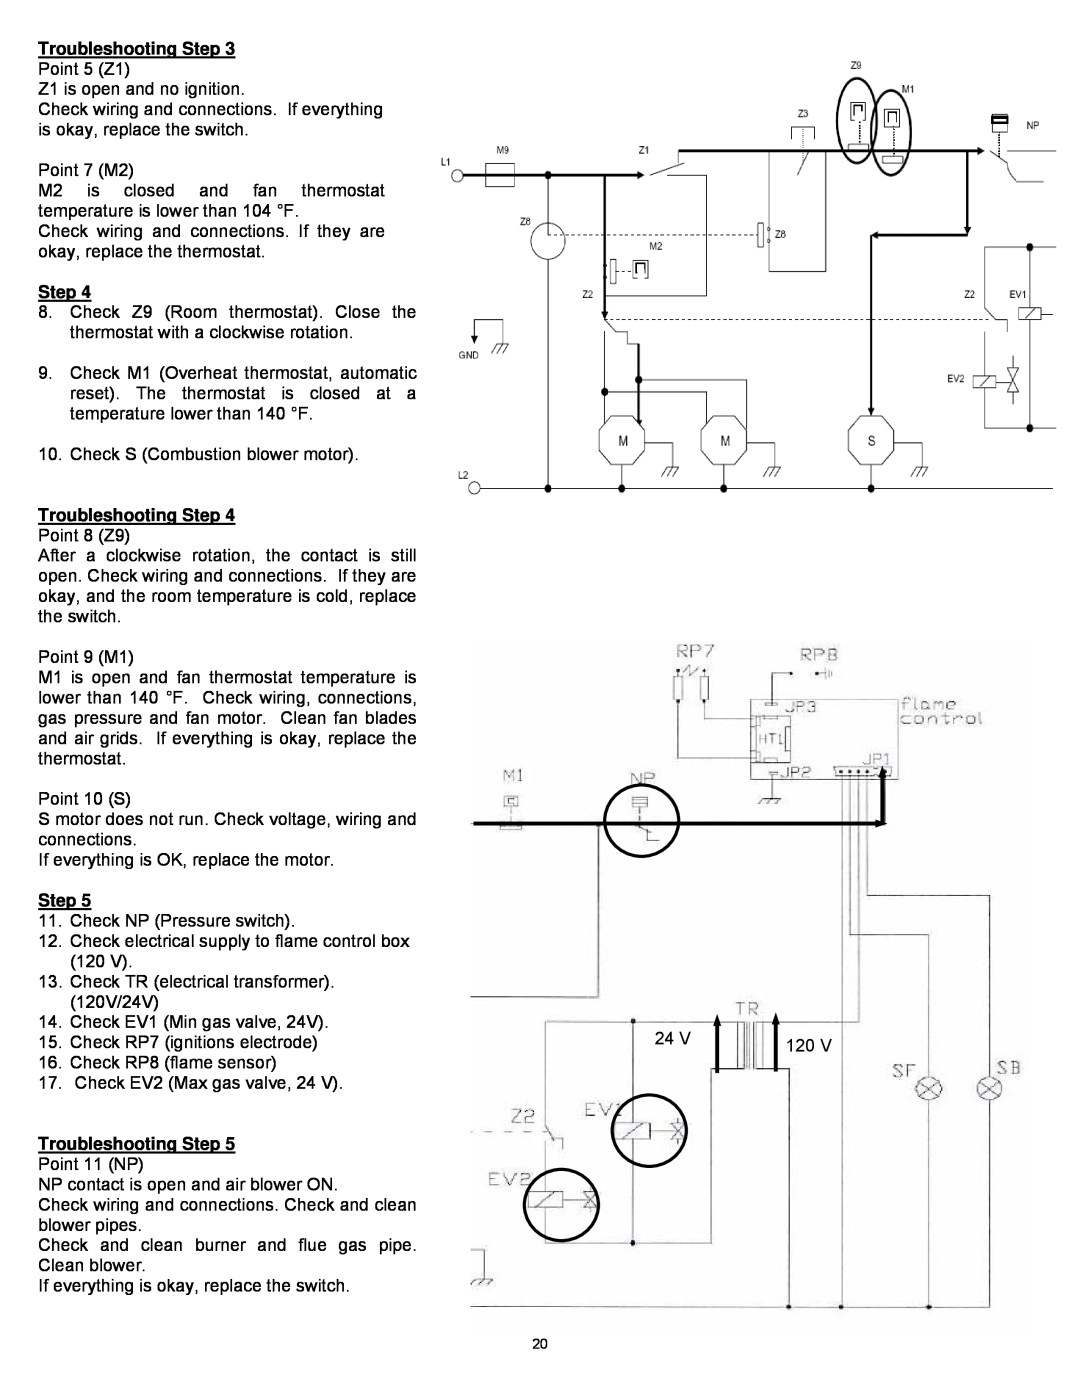 Williams 1773511, 1773512 installation instructions Troubleshooting Step 